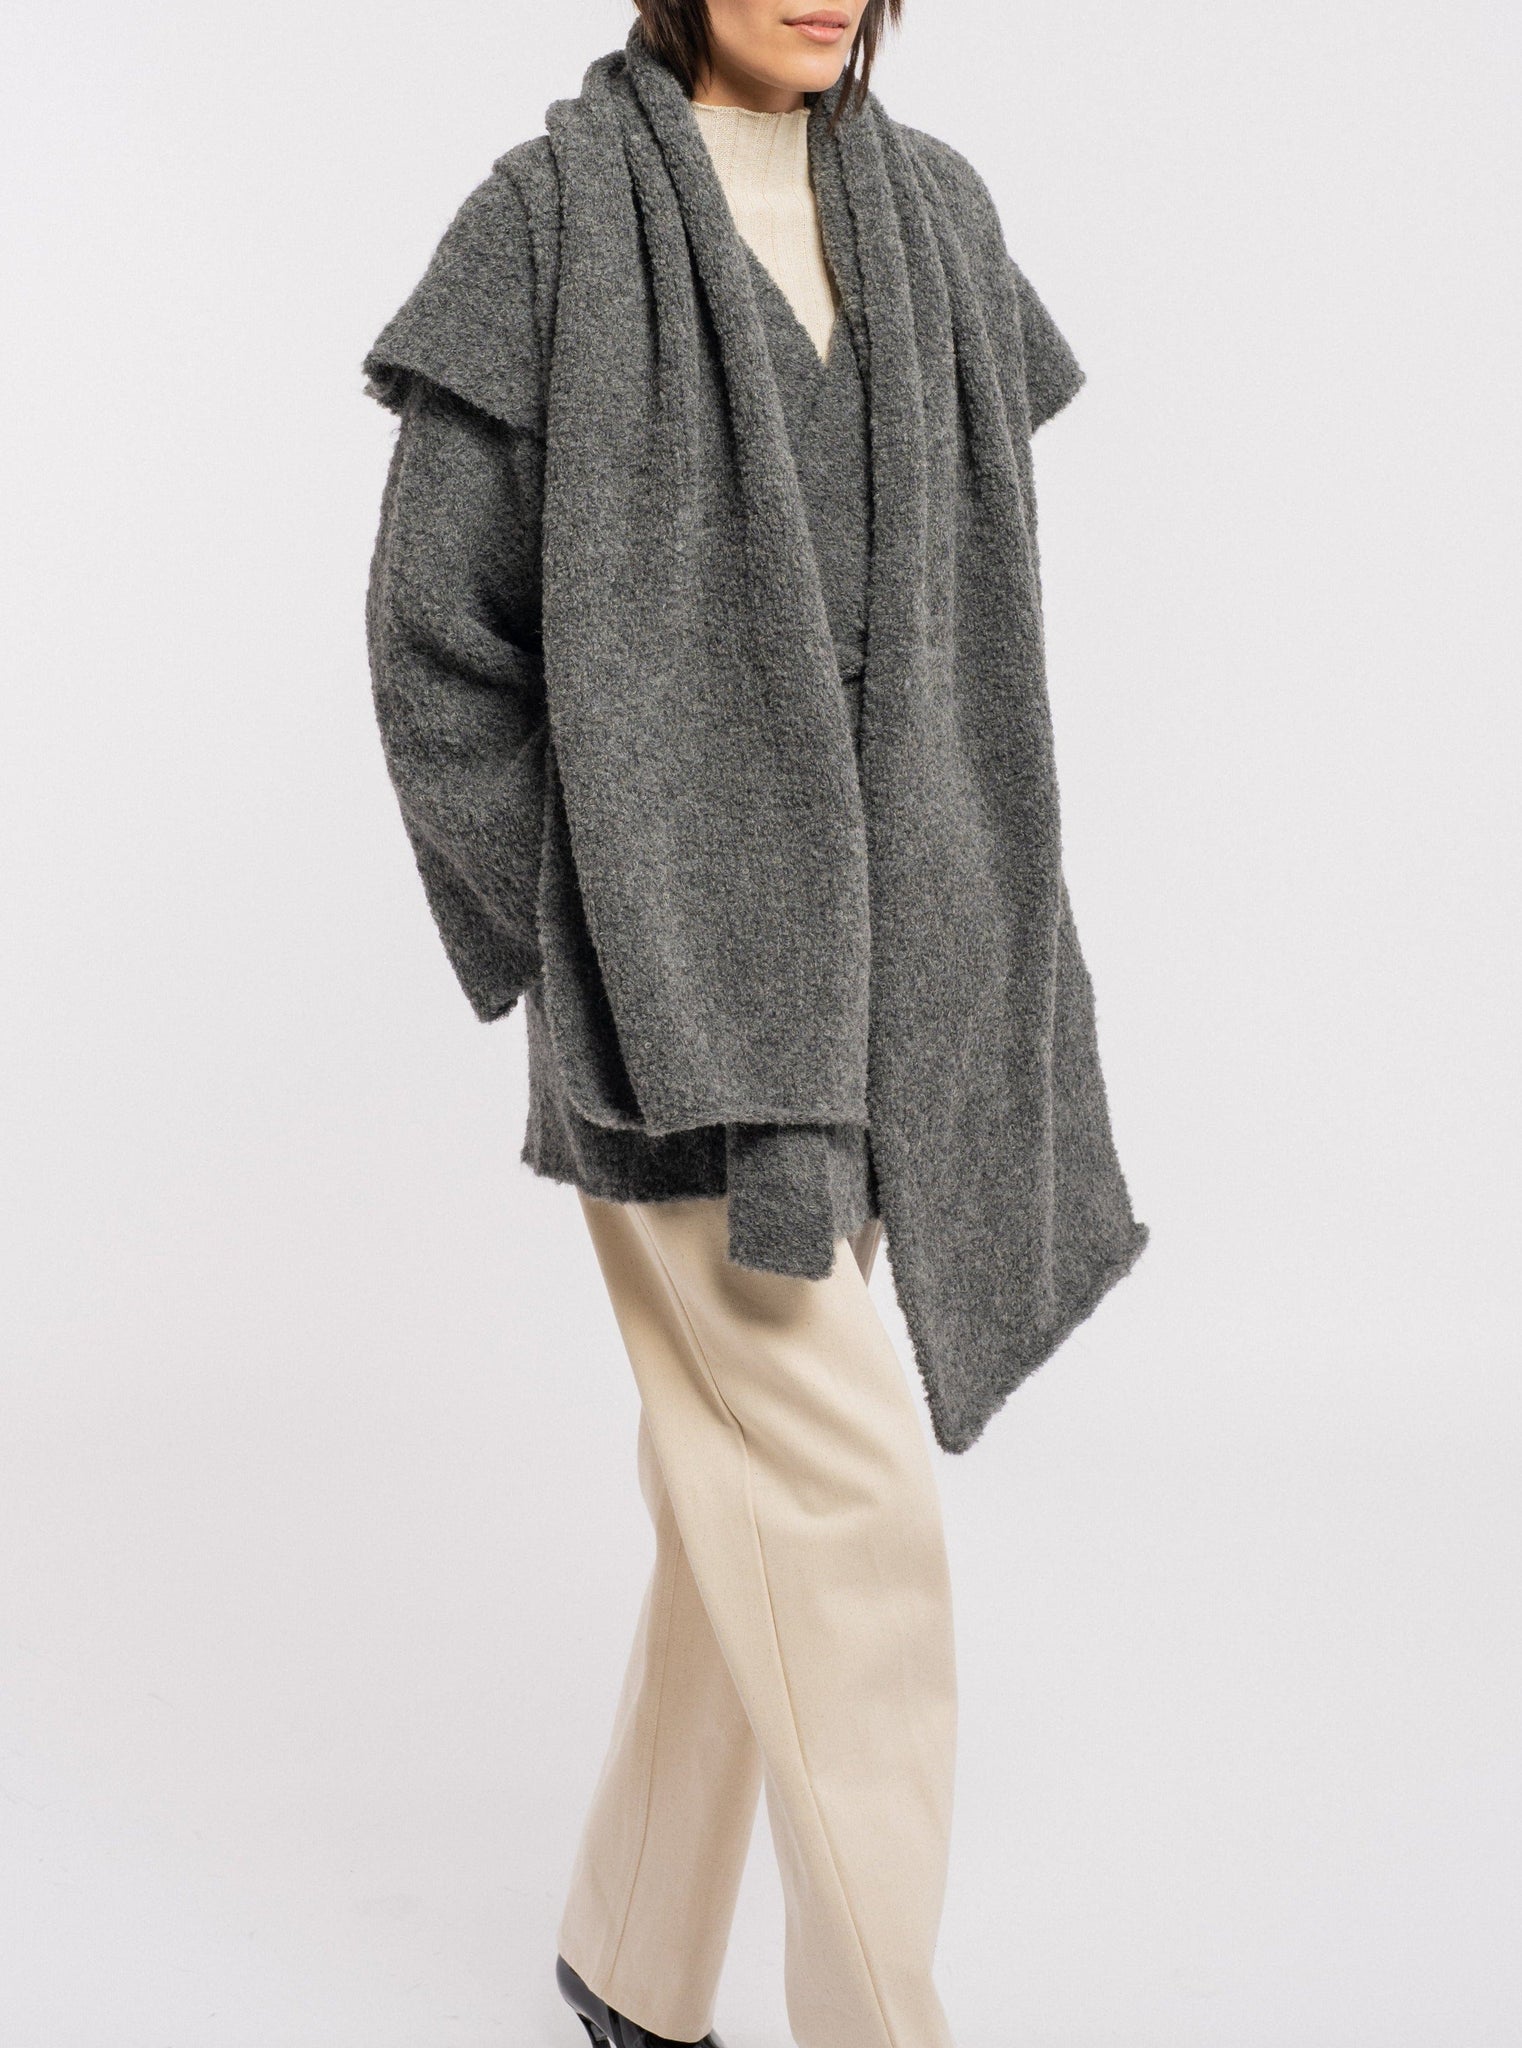 The model is wearing a Heirloom Knit Scarf - Charcoal Grey made with alpaca fiber and beige pants.